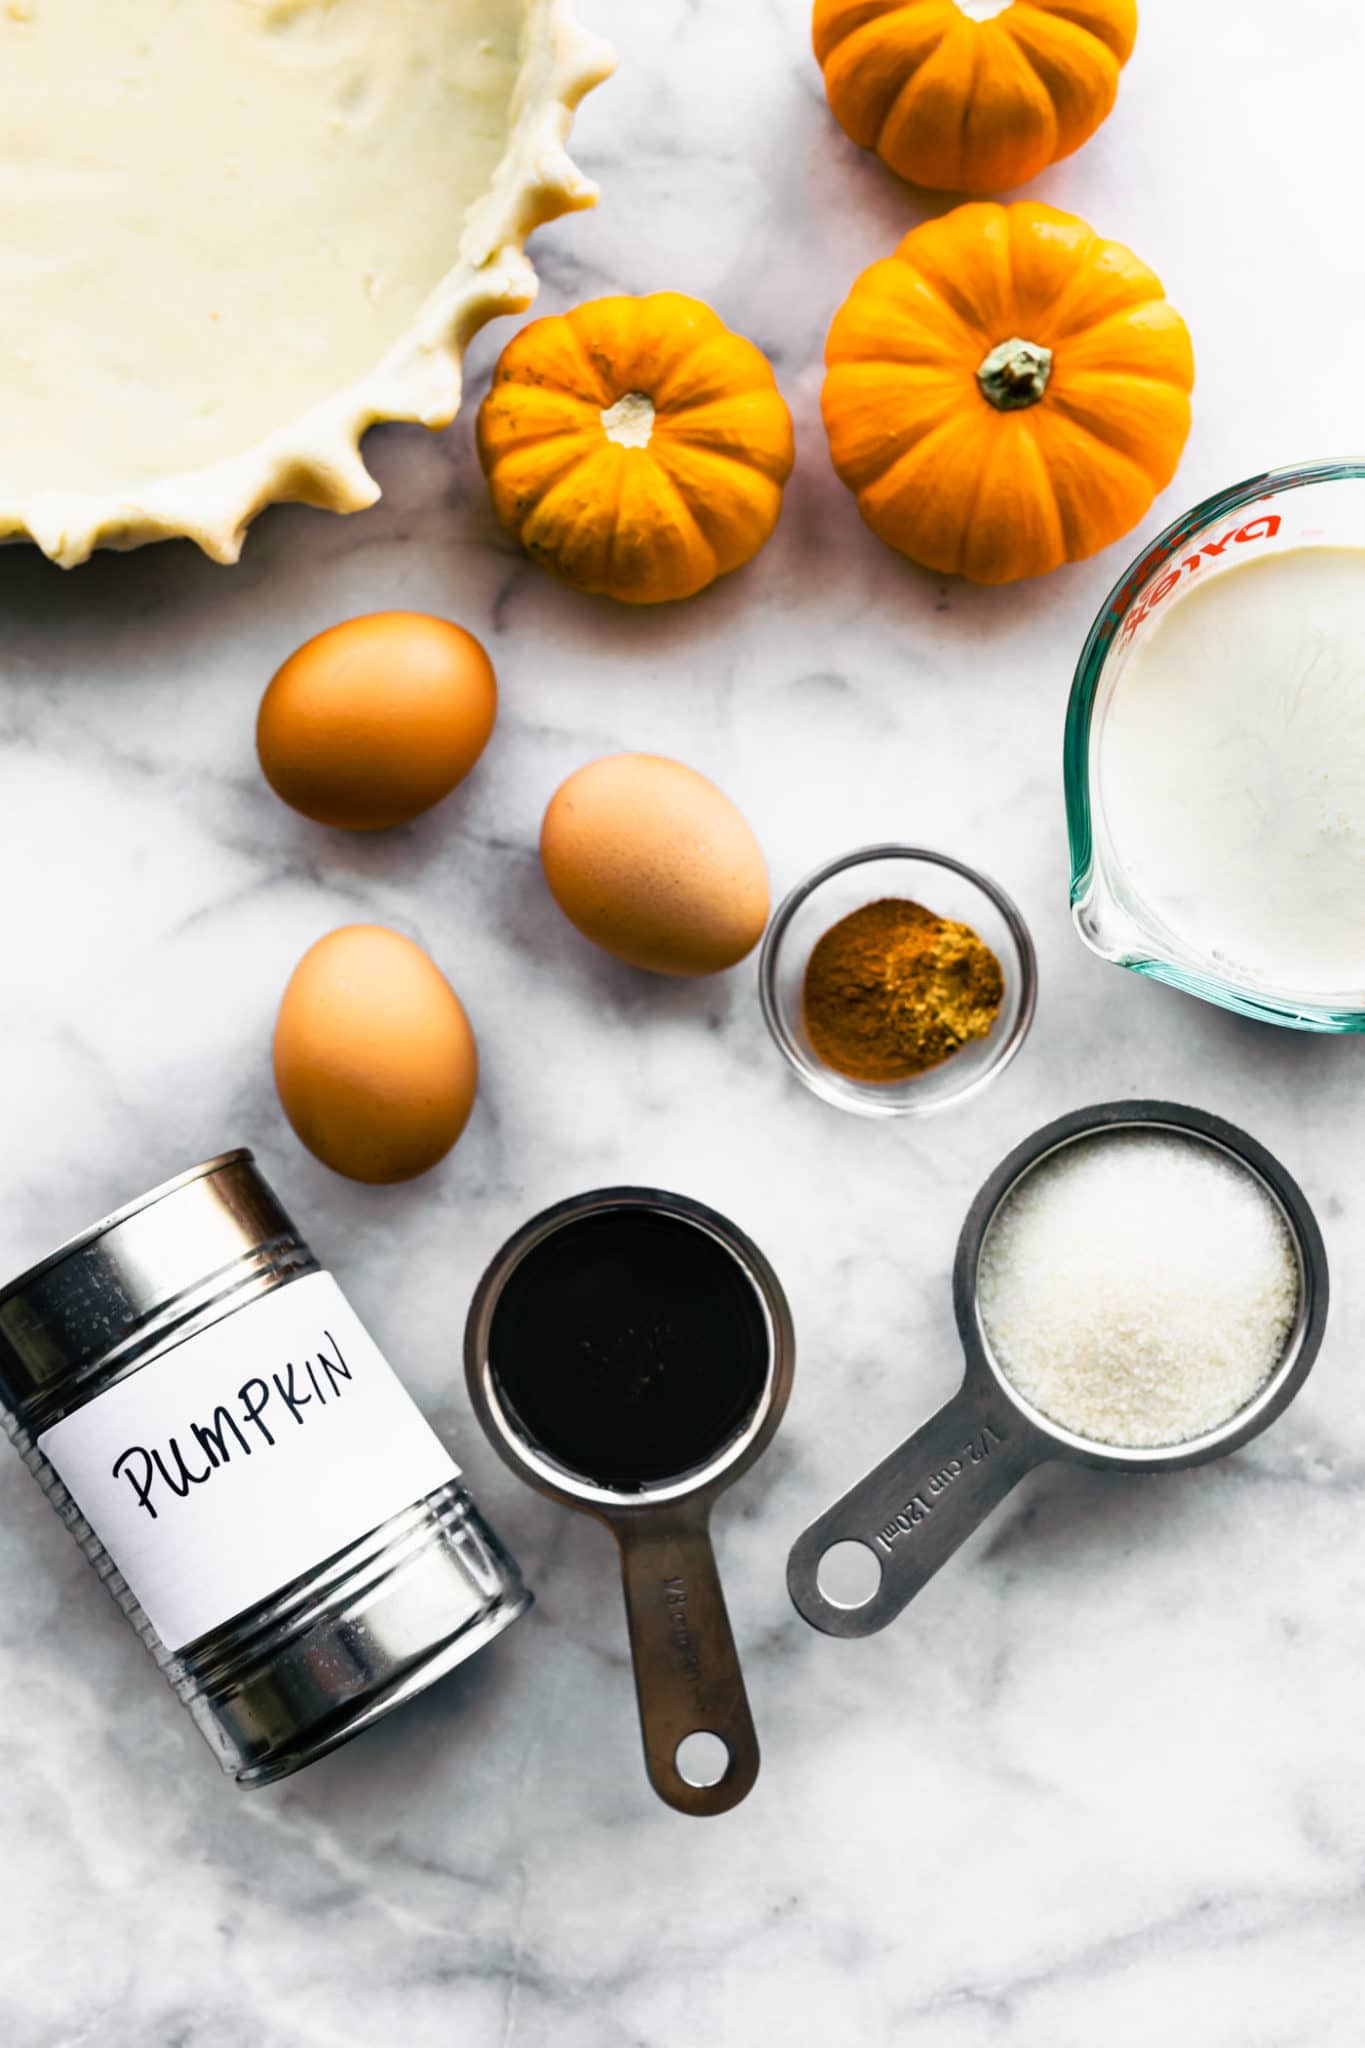 Ingredients for Gluten Free Pumpkin Pie arranged together in small bowls and measuring cups.